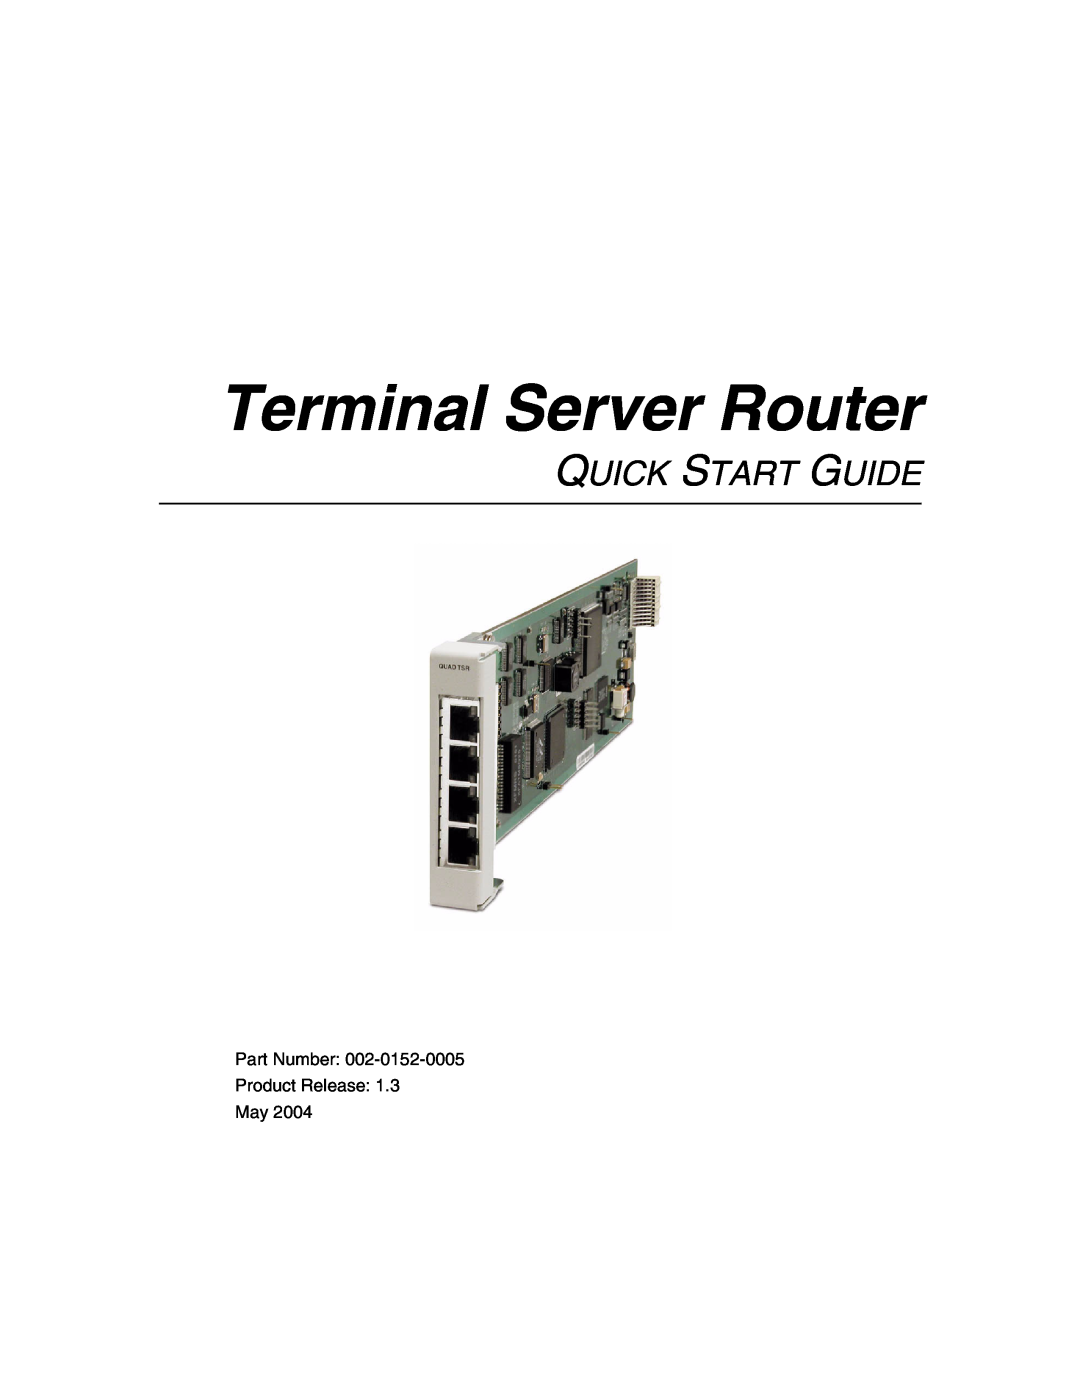 Carrier Access Terminal Server Router quick start Quick Start Guide, Part Number Product Release 